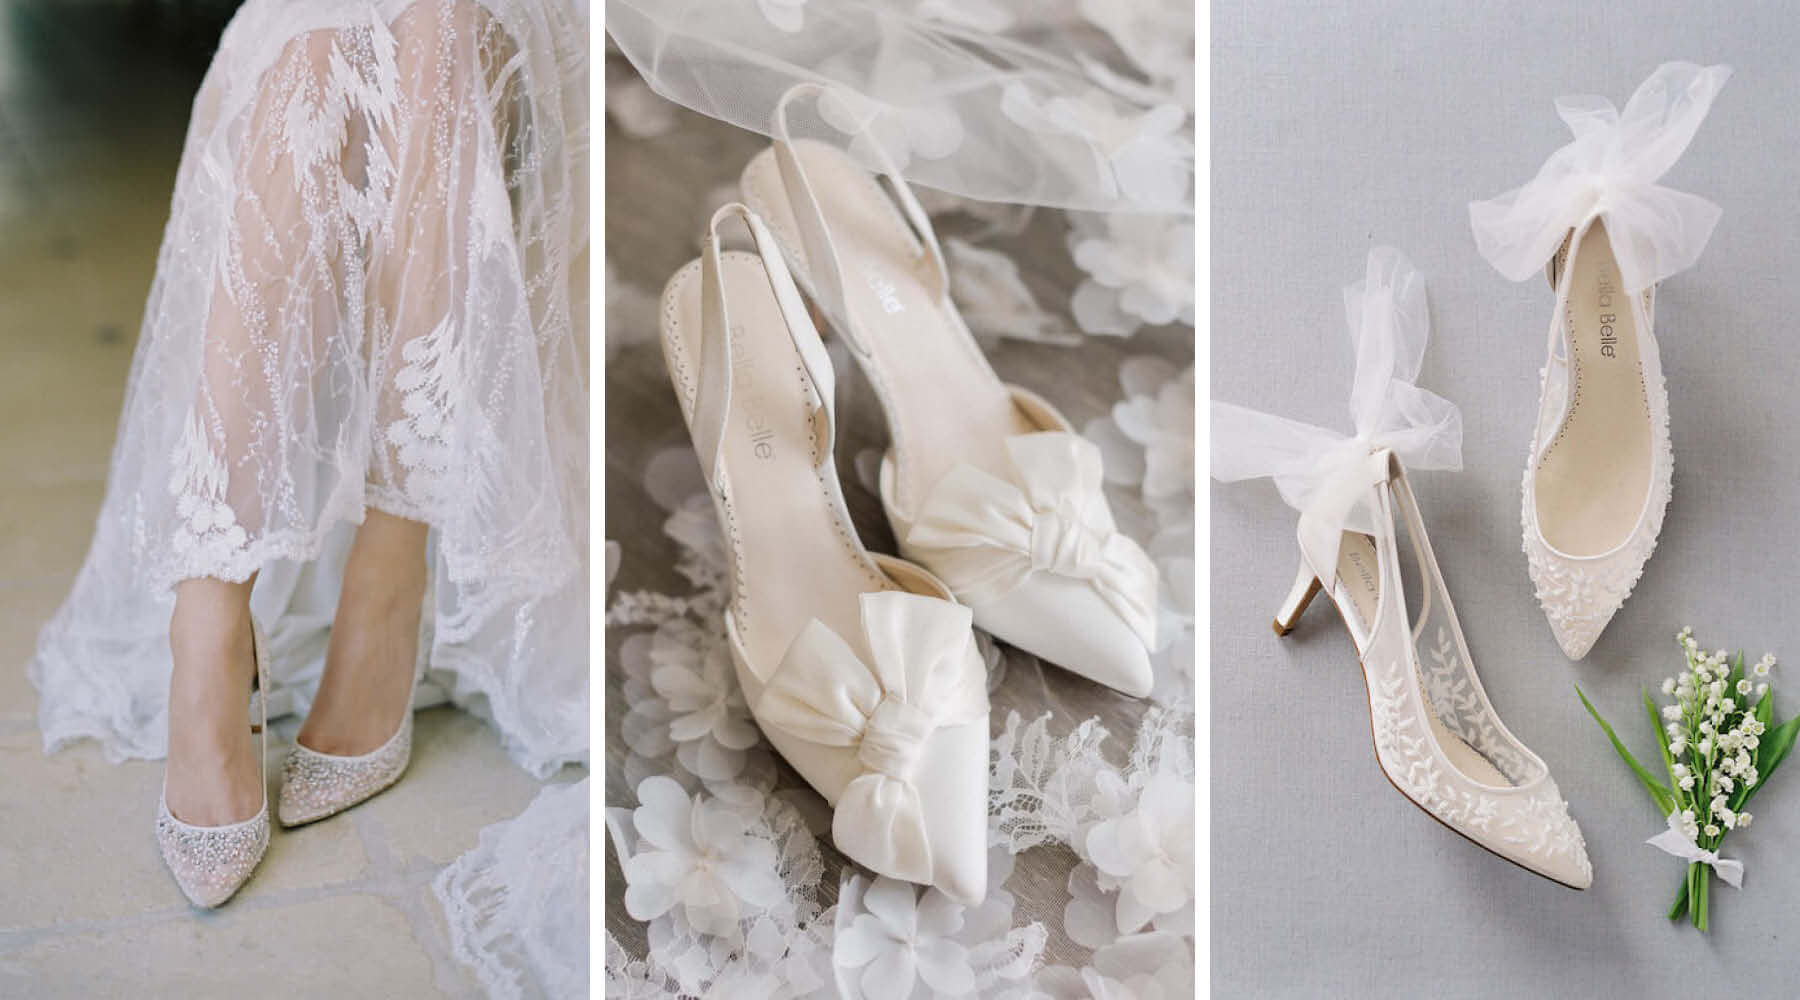 Flat Wedding Shoes: 24 Beautiful Options to Give Your Feet a Break -  hitched.co.uk - hitched.co.uk